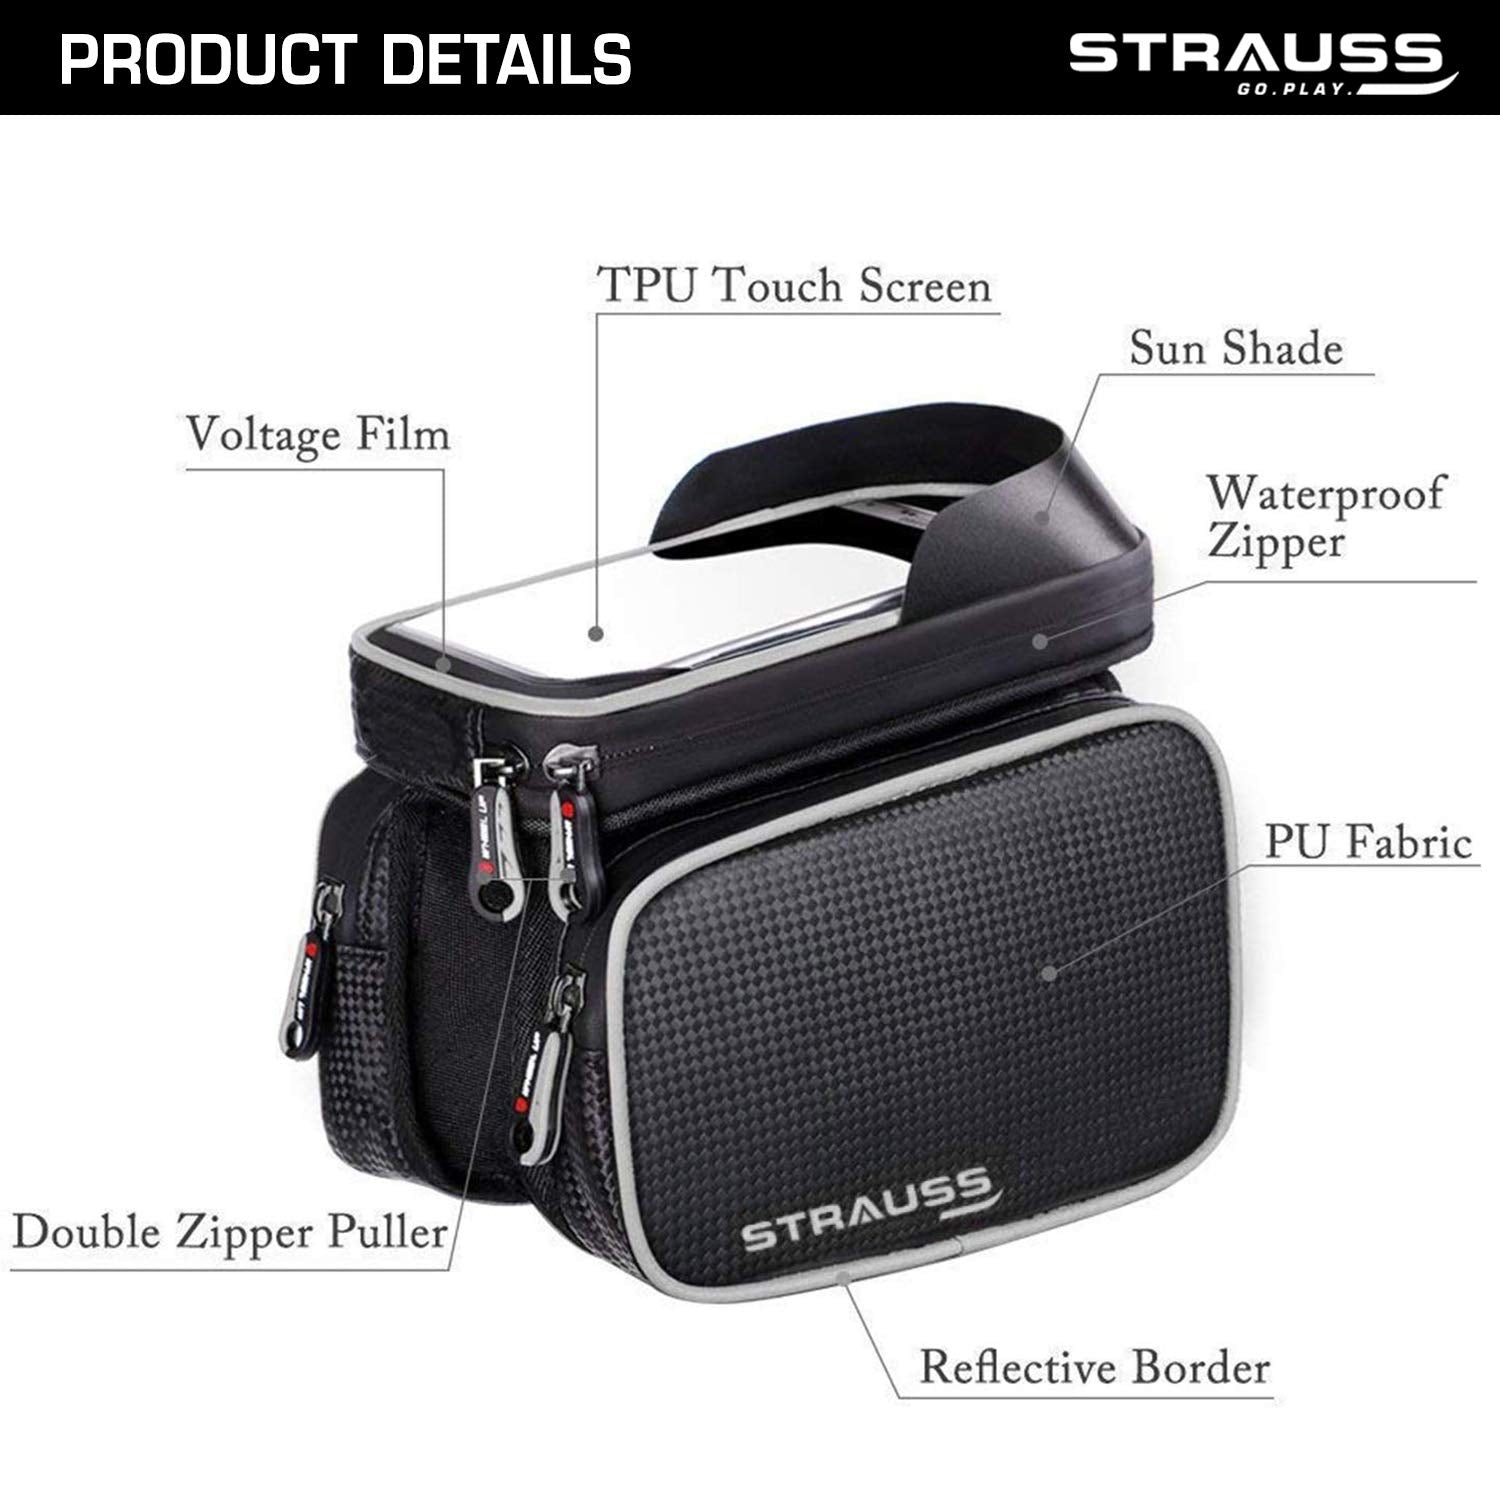 Strauss Bicycle LED Headlight with Horn and Bicycle Frame Bag, (Black)